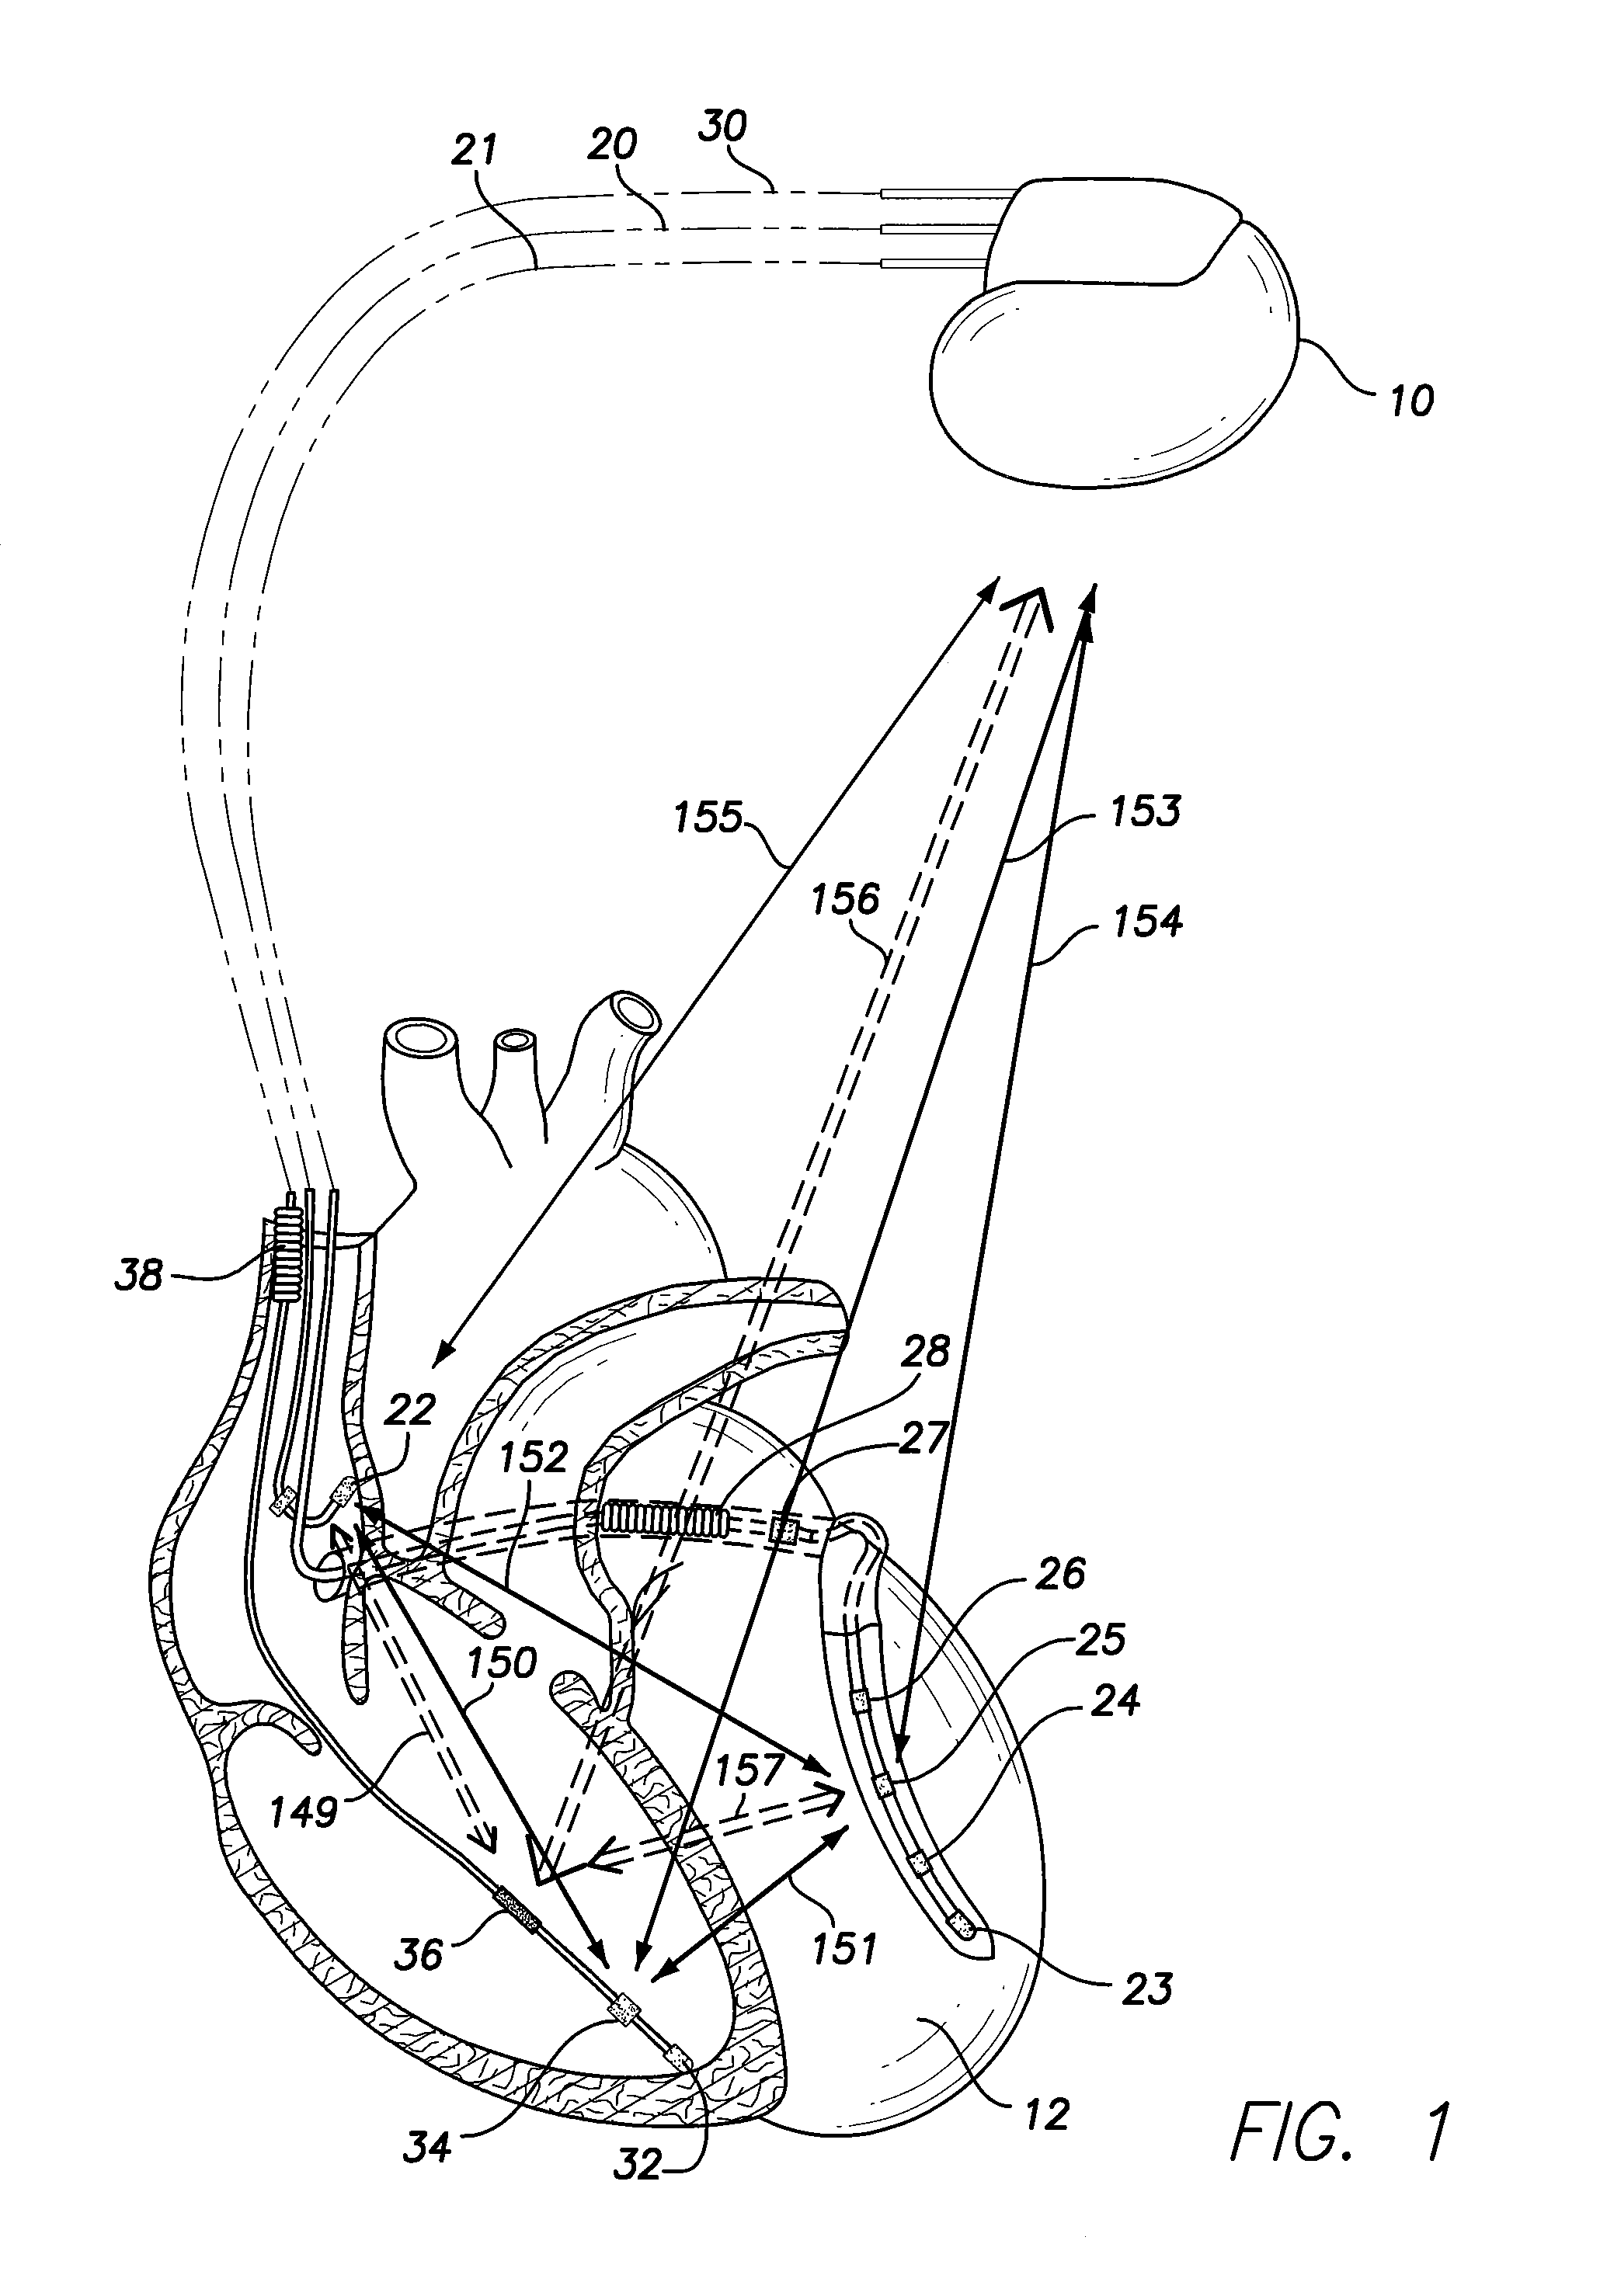 Method and system to correct contractility based on non-heart failure factors